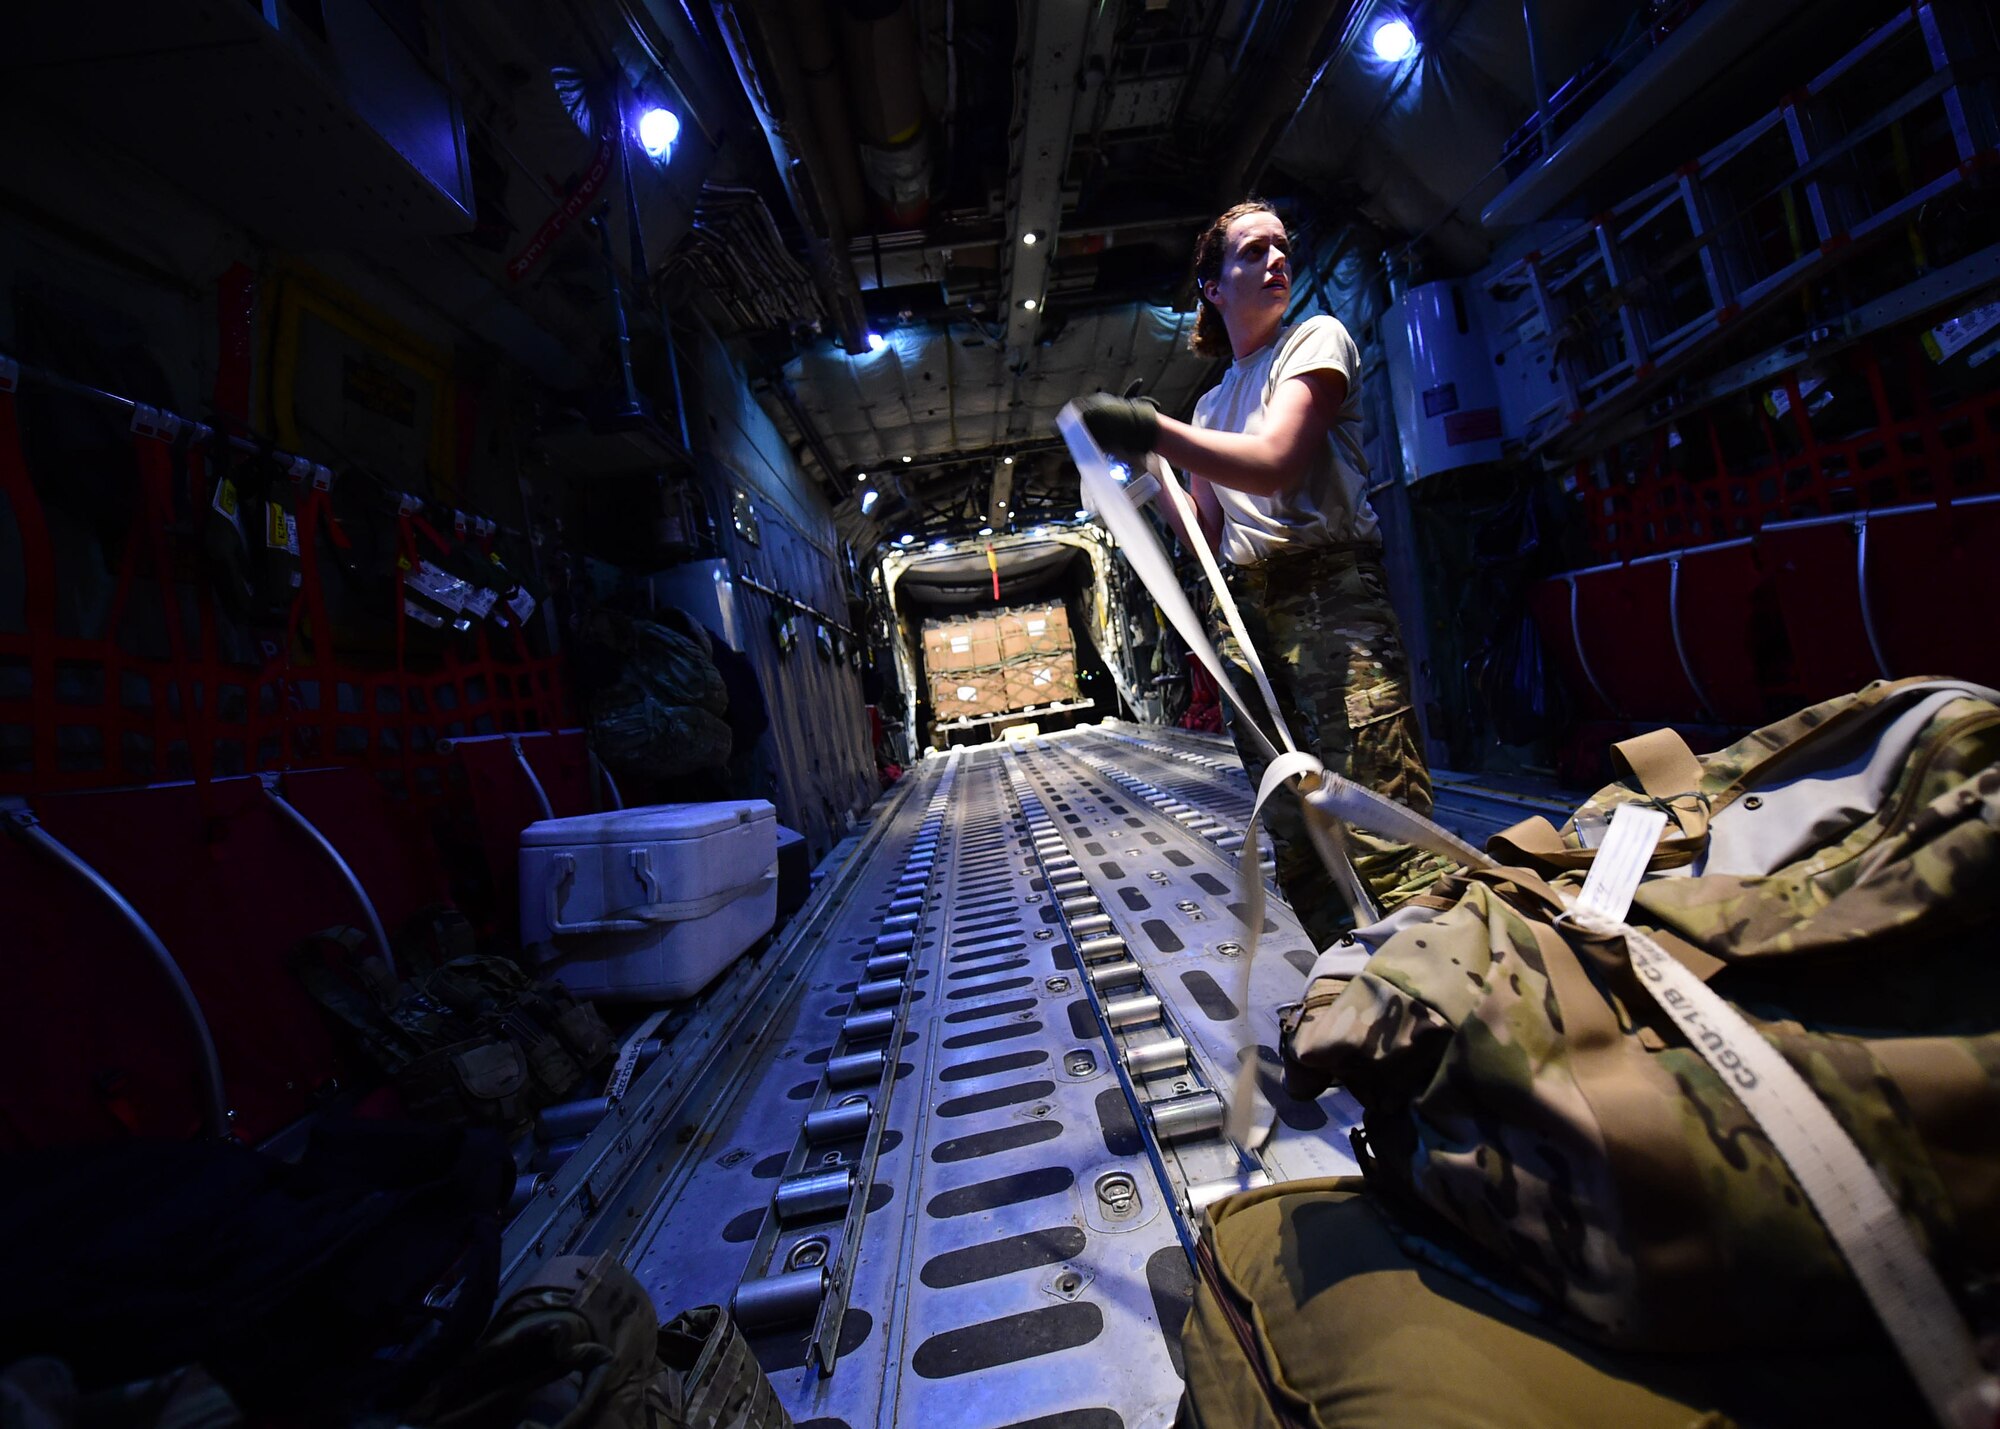 Senior Airman Erin Stewart, 737th Expeditionary Airlift Squadron loadmaster, secures cargo onboard a C-130H Hercules at an undisclosed location in Southwest Asia, Oct. 27, 2015. The 737th EAS conducts airlift, airdrop and reconnaissance missions in support of Operation INHERENT RESOLVE. (U.S. Air Force photo by Staff Sgt. Jerilyn Quintanilla)